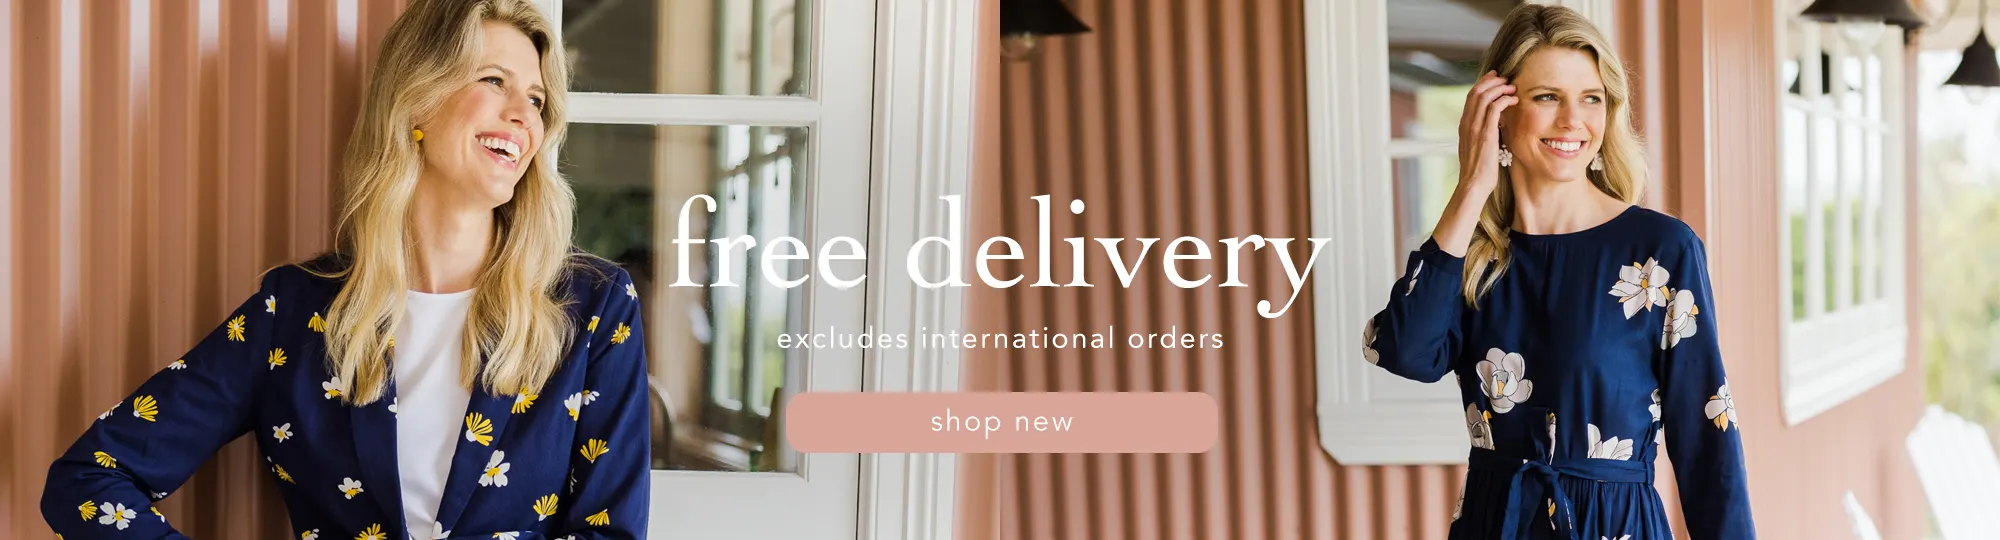 Free delivery on Australian orders with this Birdsnest promo code